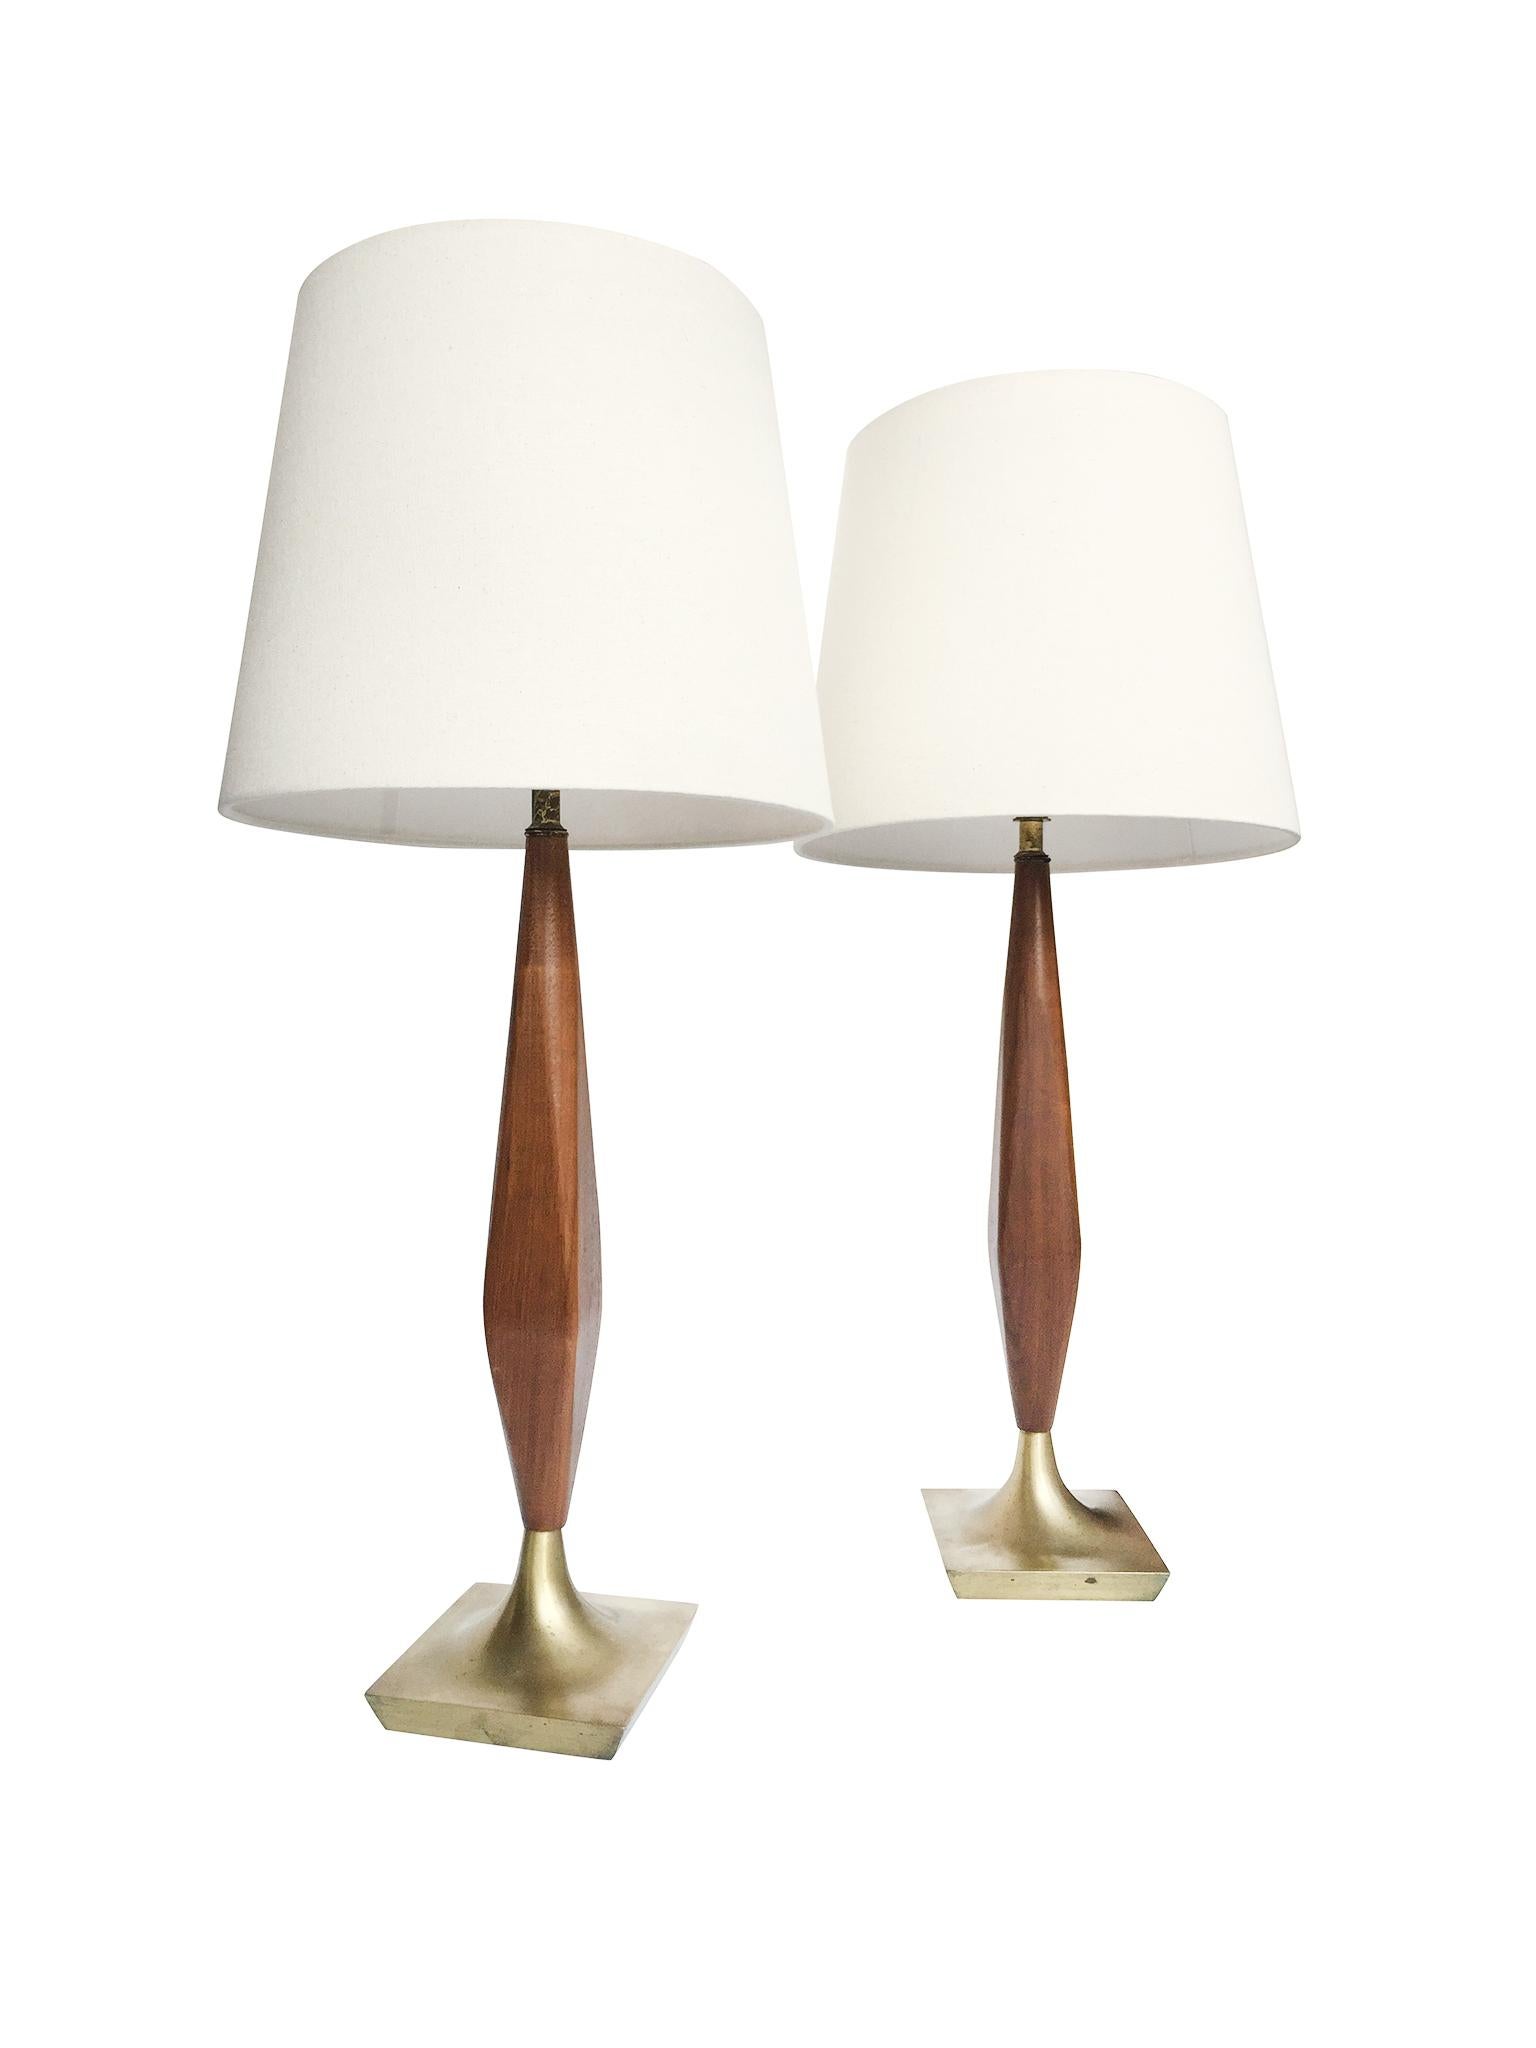 This handsome pair of midcentury lamps is comprised of a walnut stem and a brass base. The hand-crafted woodwork on the walnut is beautiful, with the stem's edges rounded into a spindle form. The brass bases square in shape and bevelled. These lamps